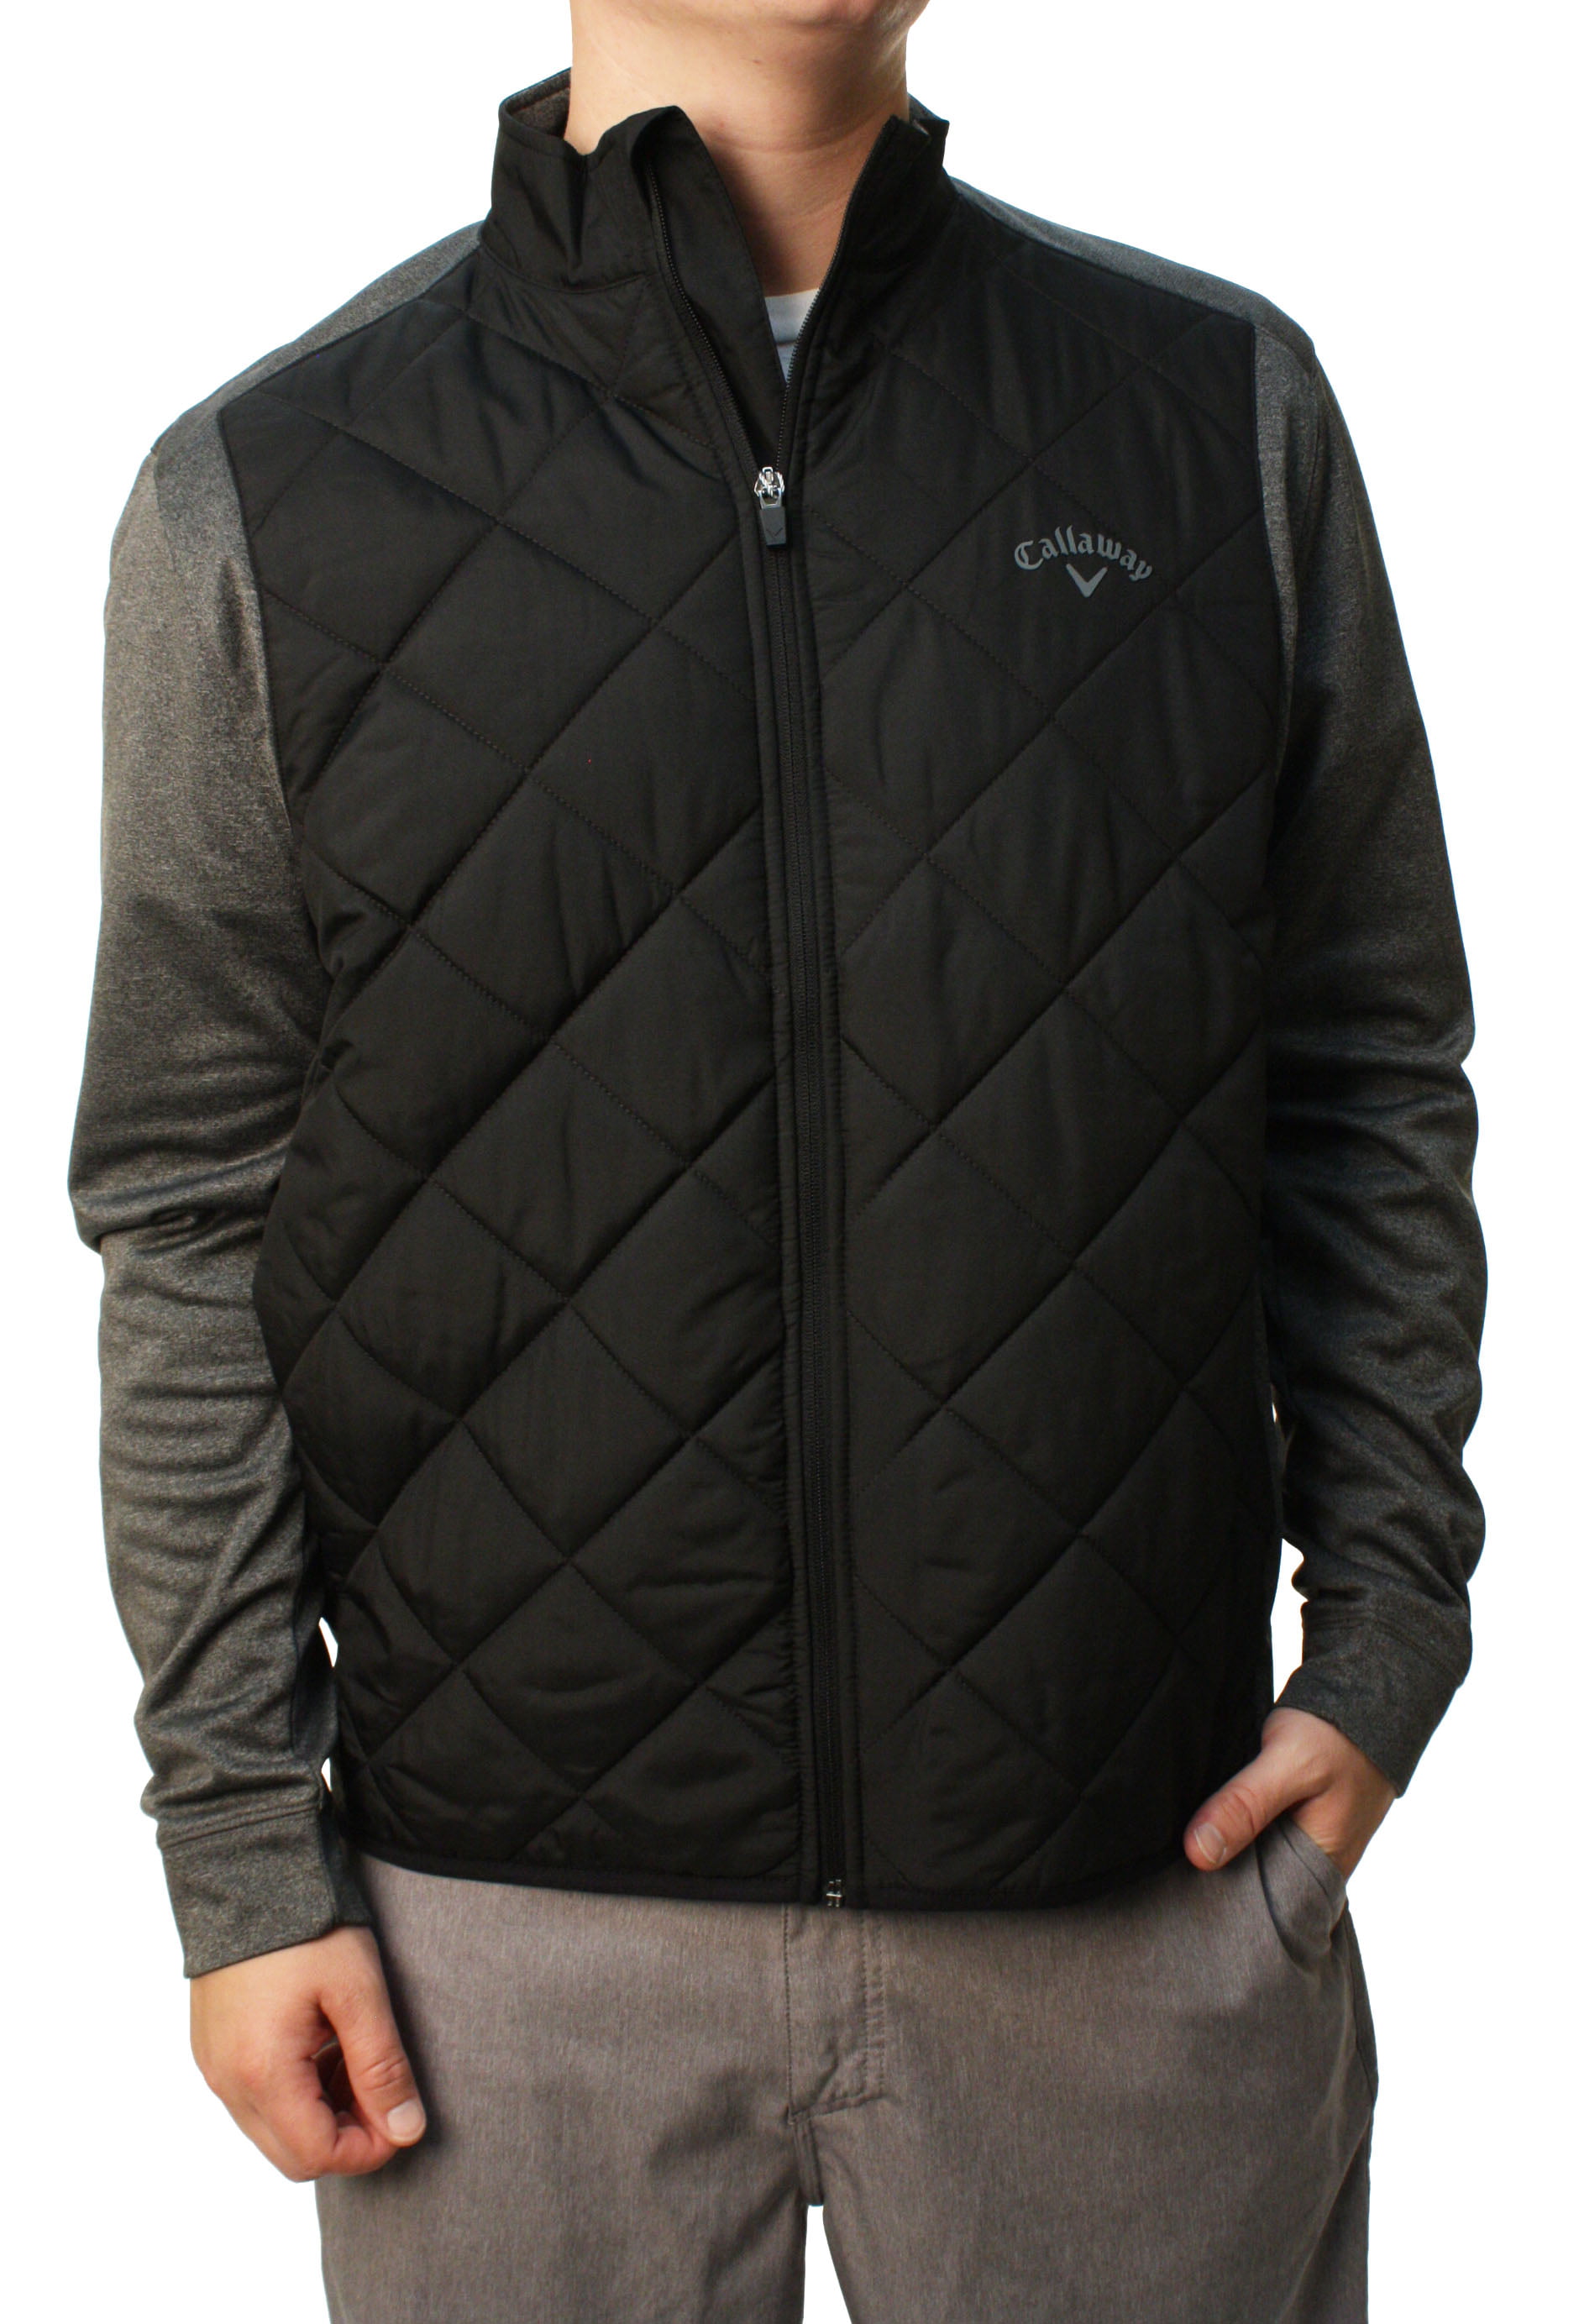 callaway quilted golf jacket